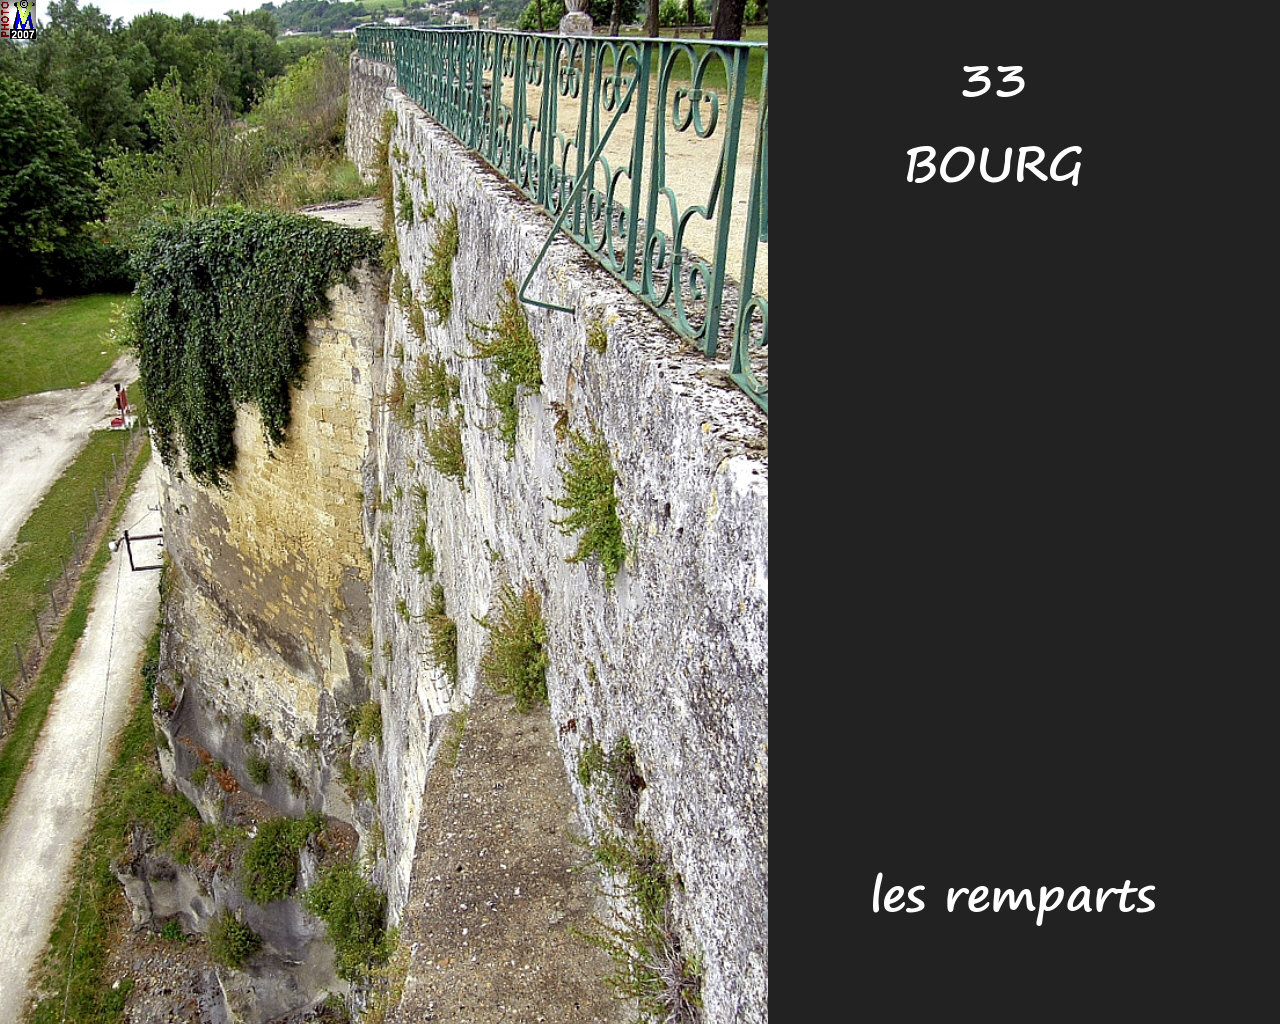 33BOURG_remparts_104.jpg